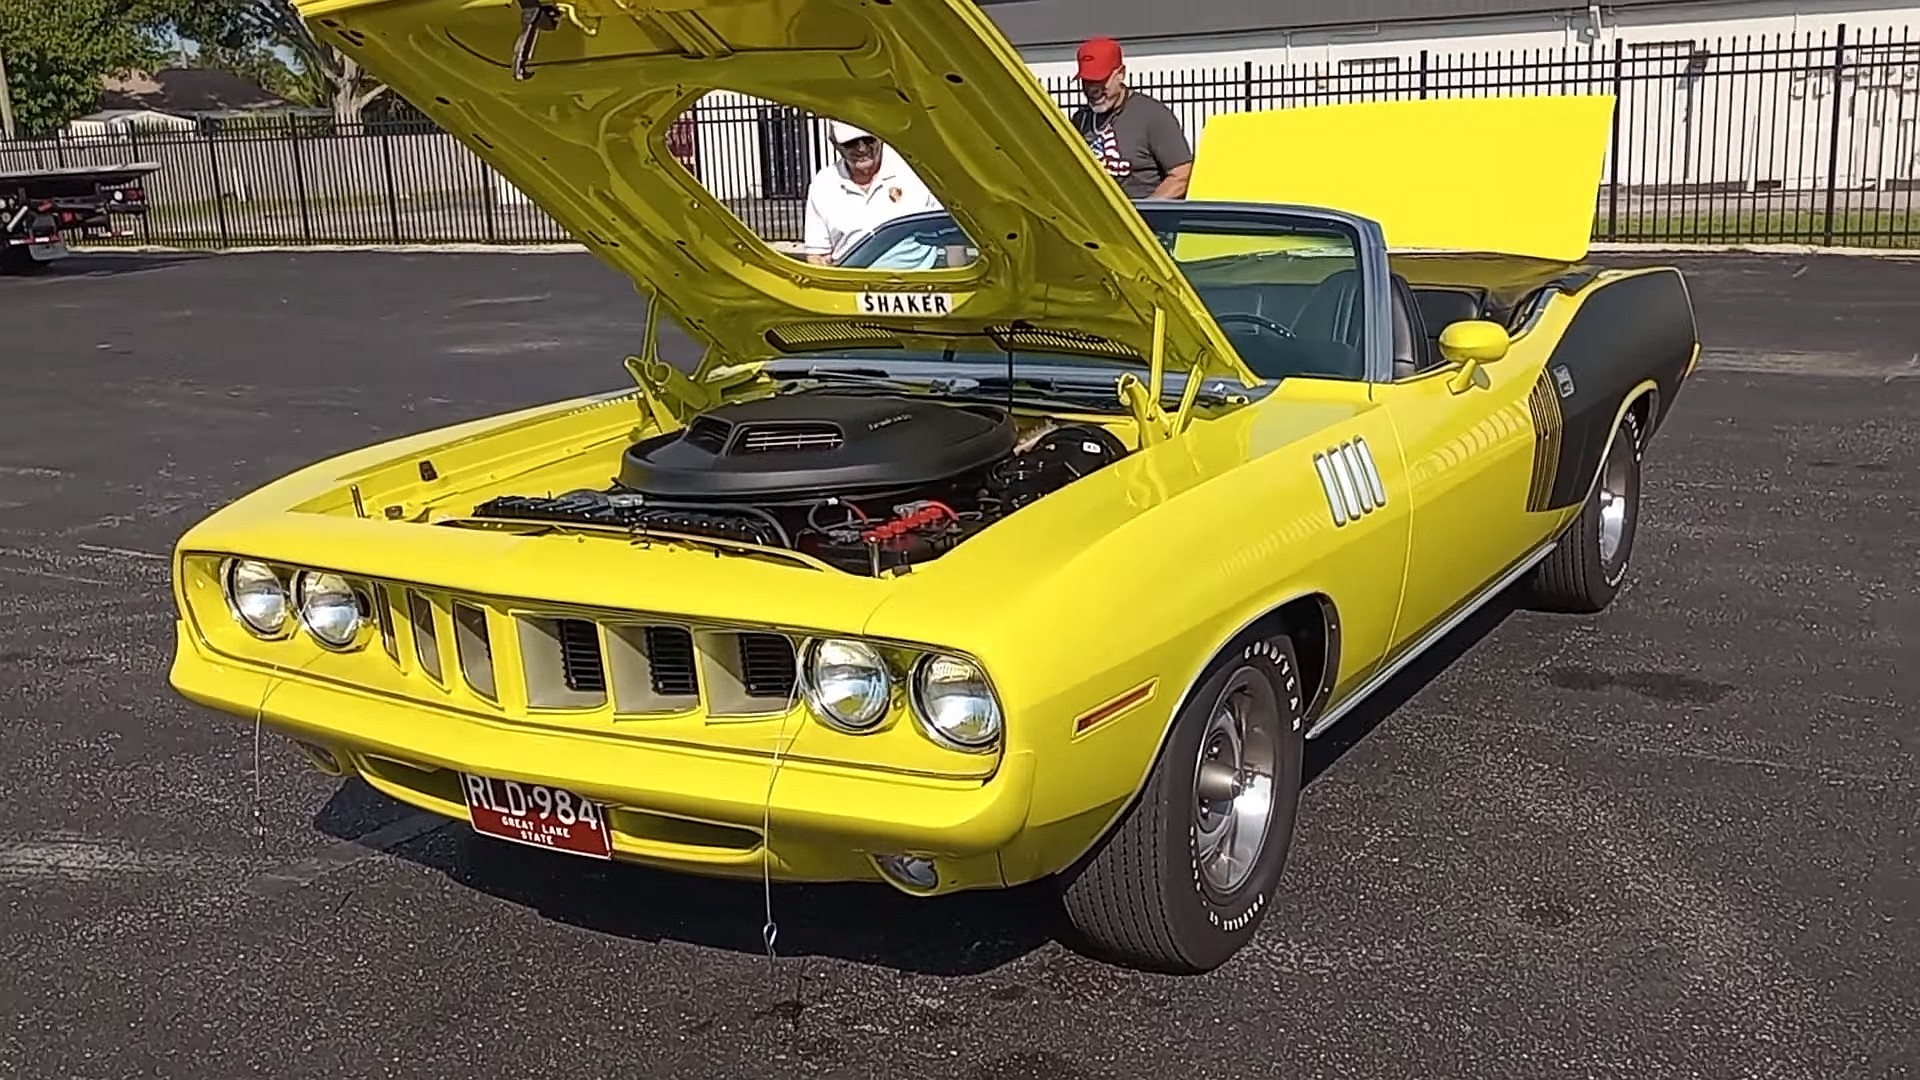 1971 Plymouth HEMI 'Cuda Looks Like a Million-Dollar Gem, but There's a Catch - autoevolution